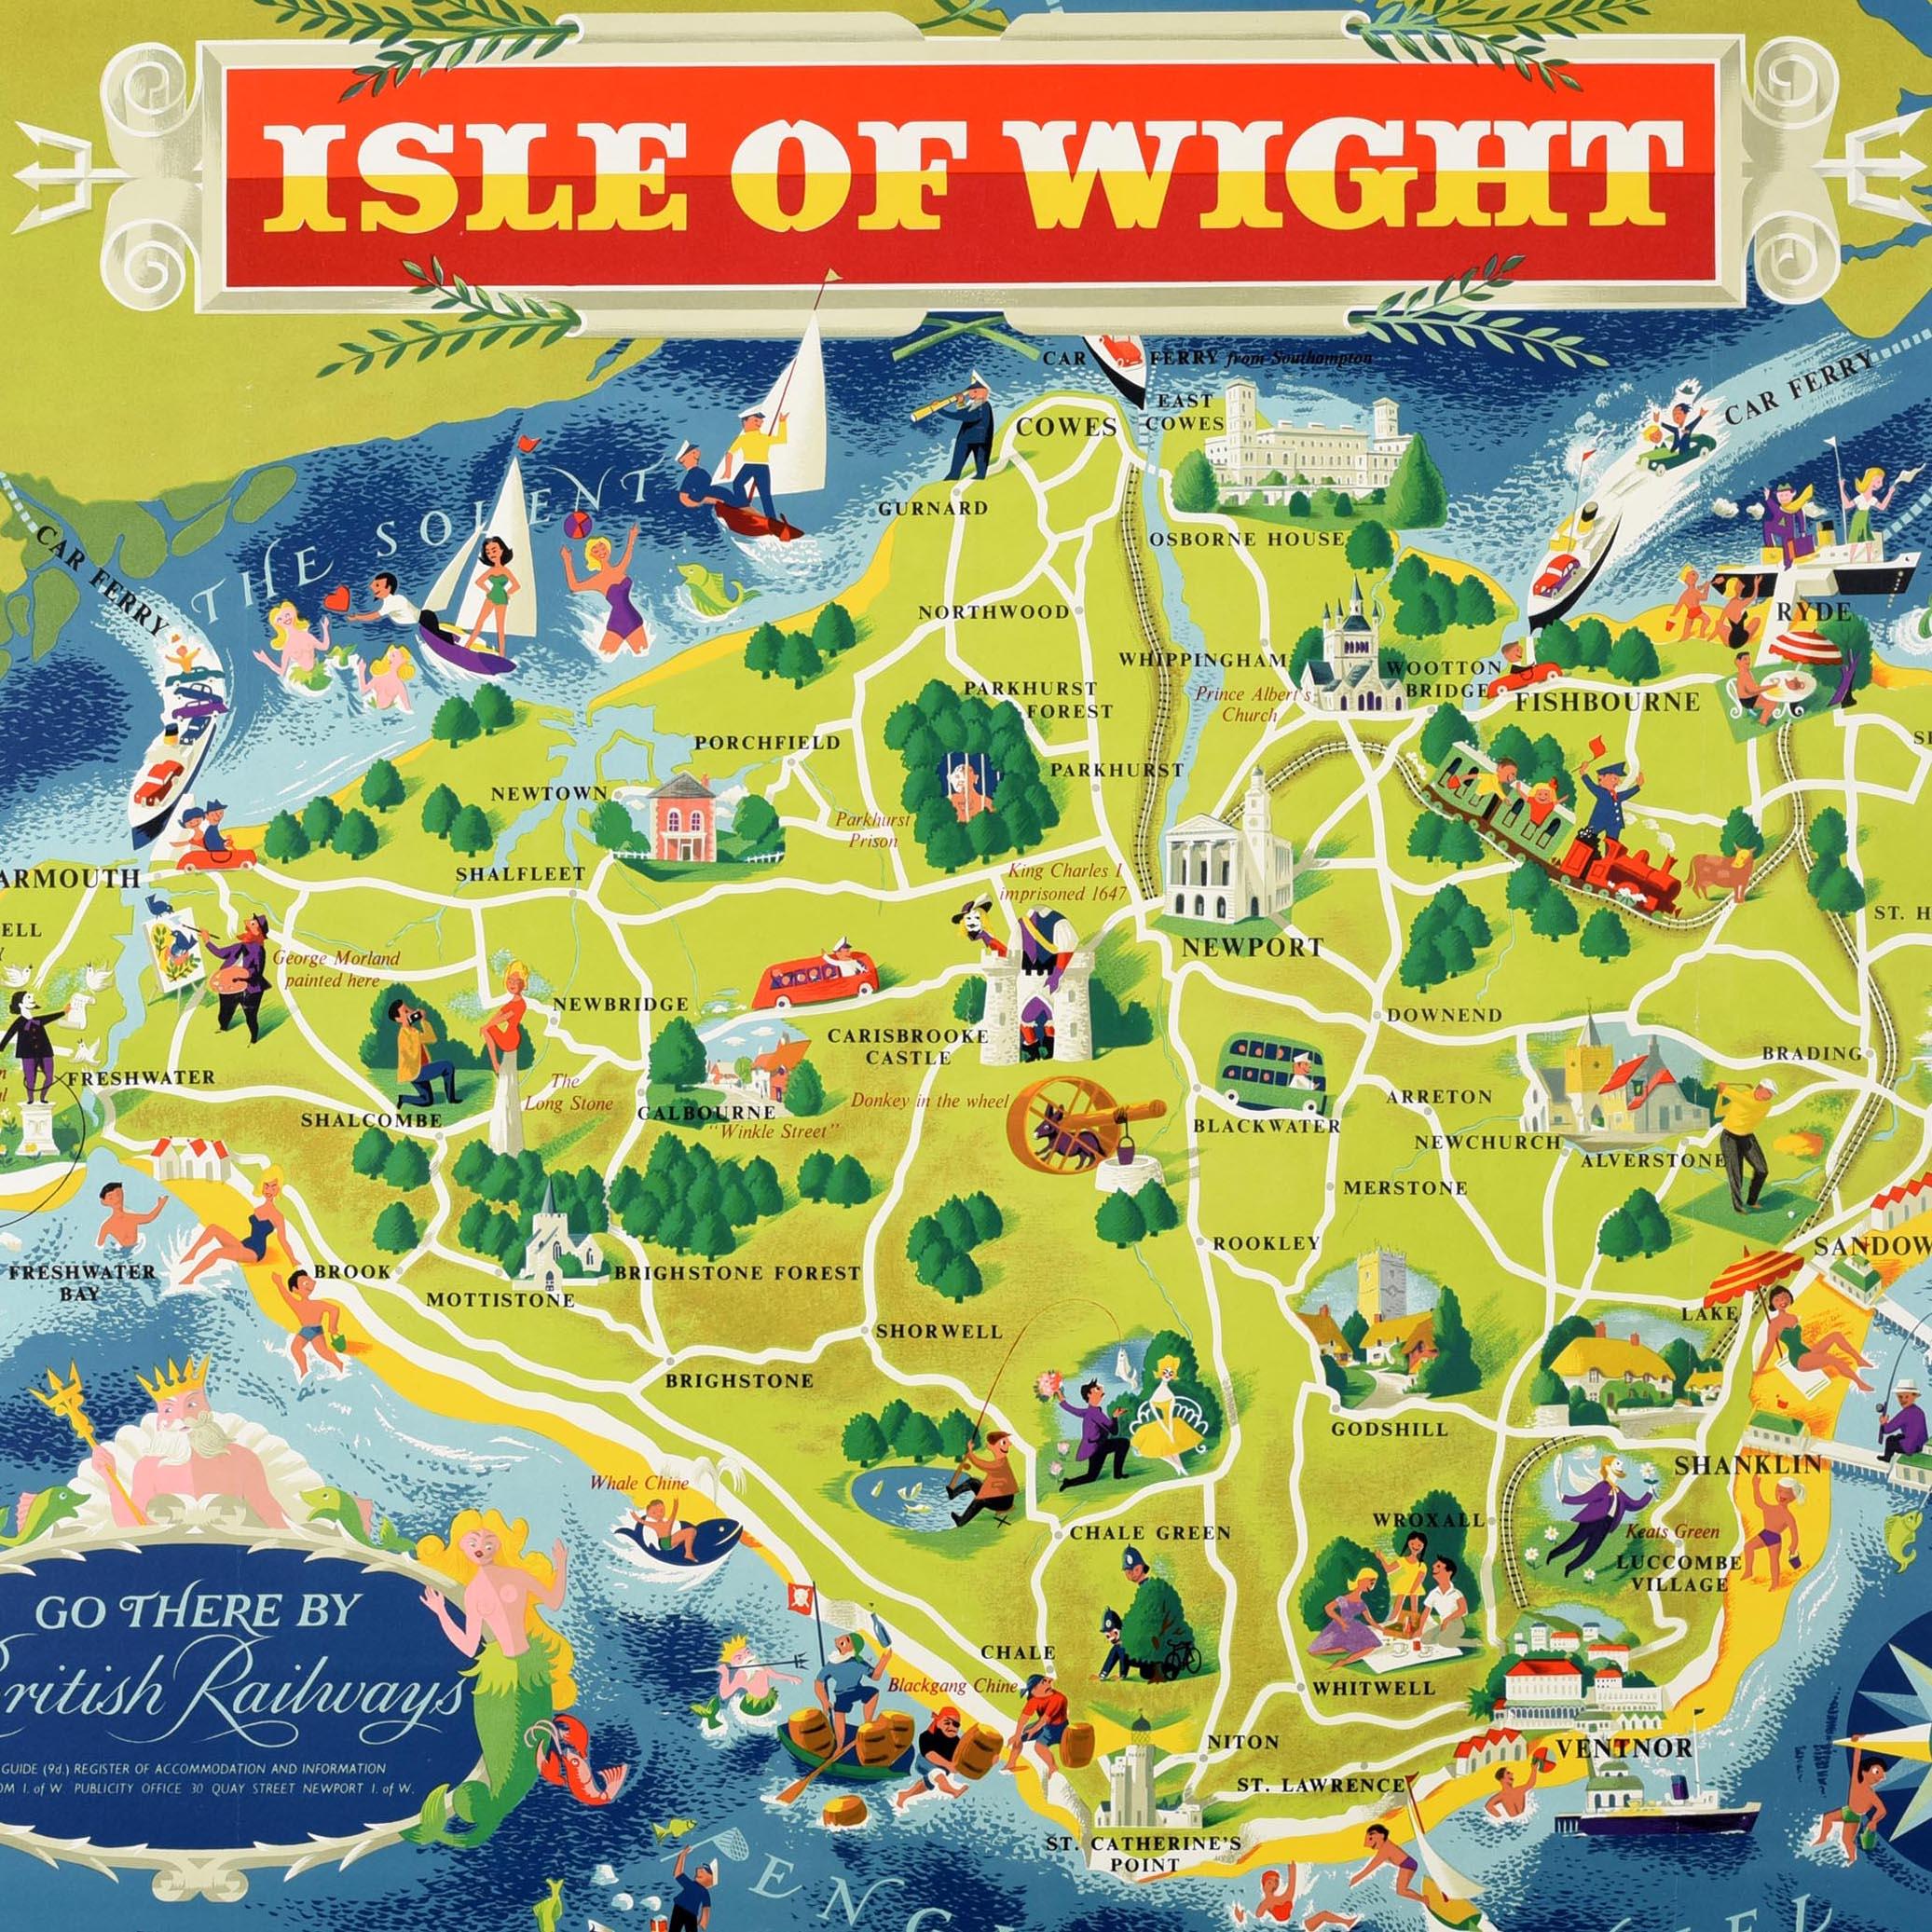 Original vintage travel poster for the Isle of Wight Go There By British Railways - Southern Region. Great pictorial map artwork by the notable commercial artist and poster designer Reginald Montague Lander (1913-1980) featuring colourful